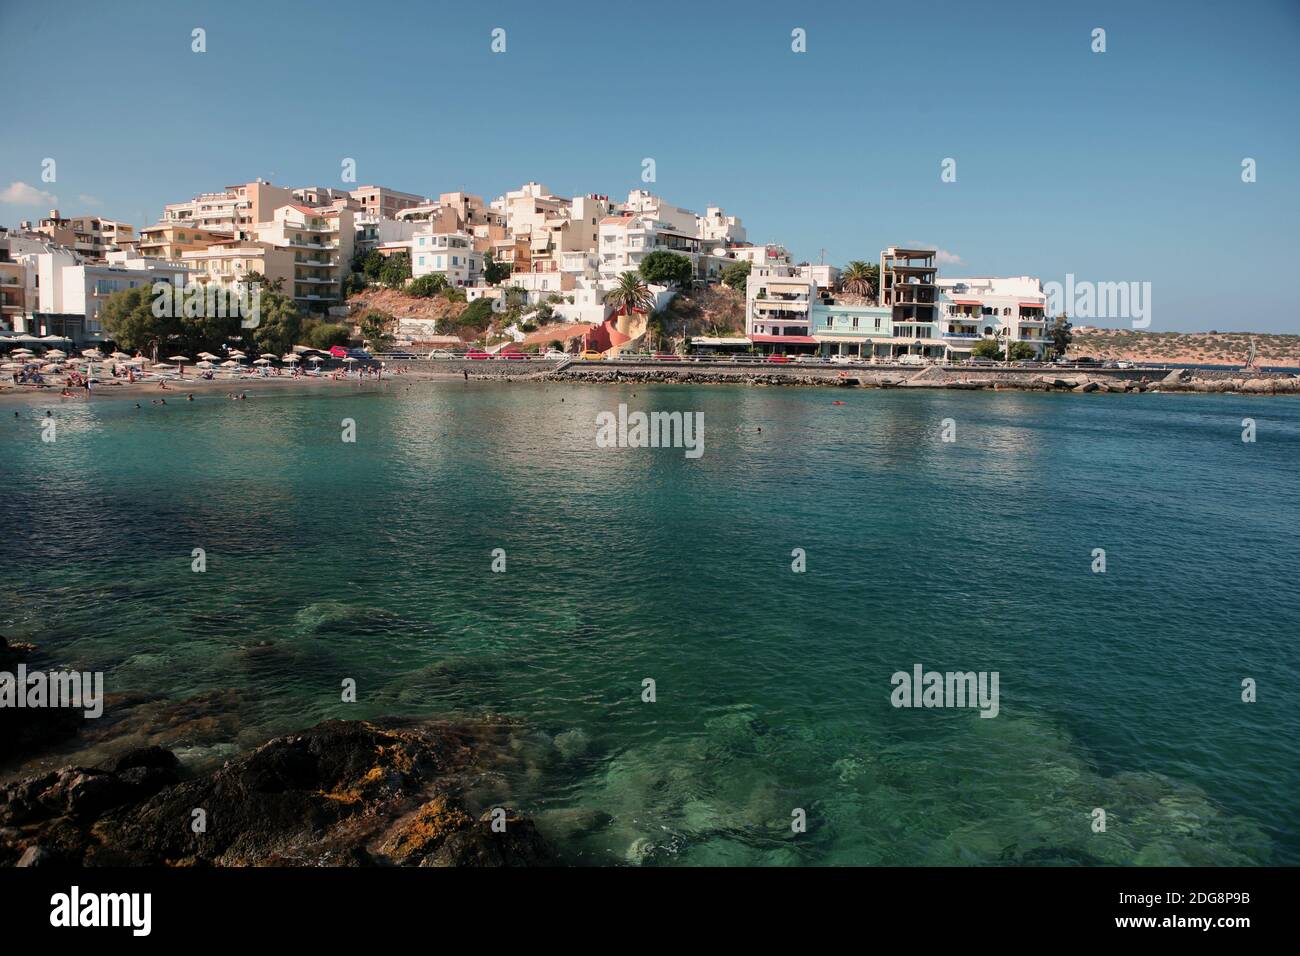 The town of Aghios Nikolaos on Crete with one of its beaches viewed from across the bay Stock Photo